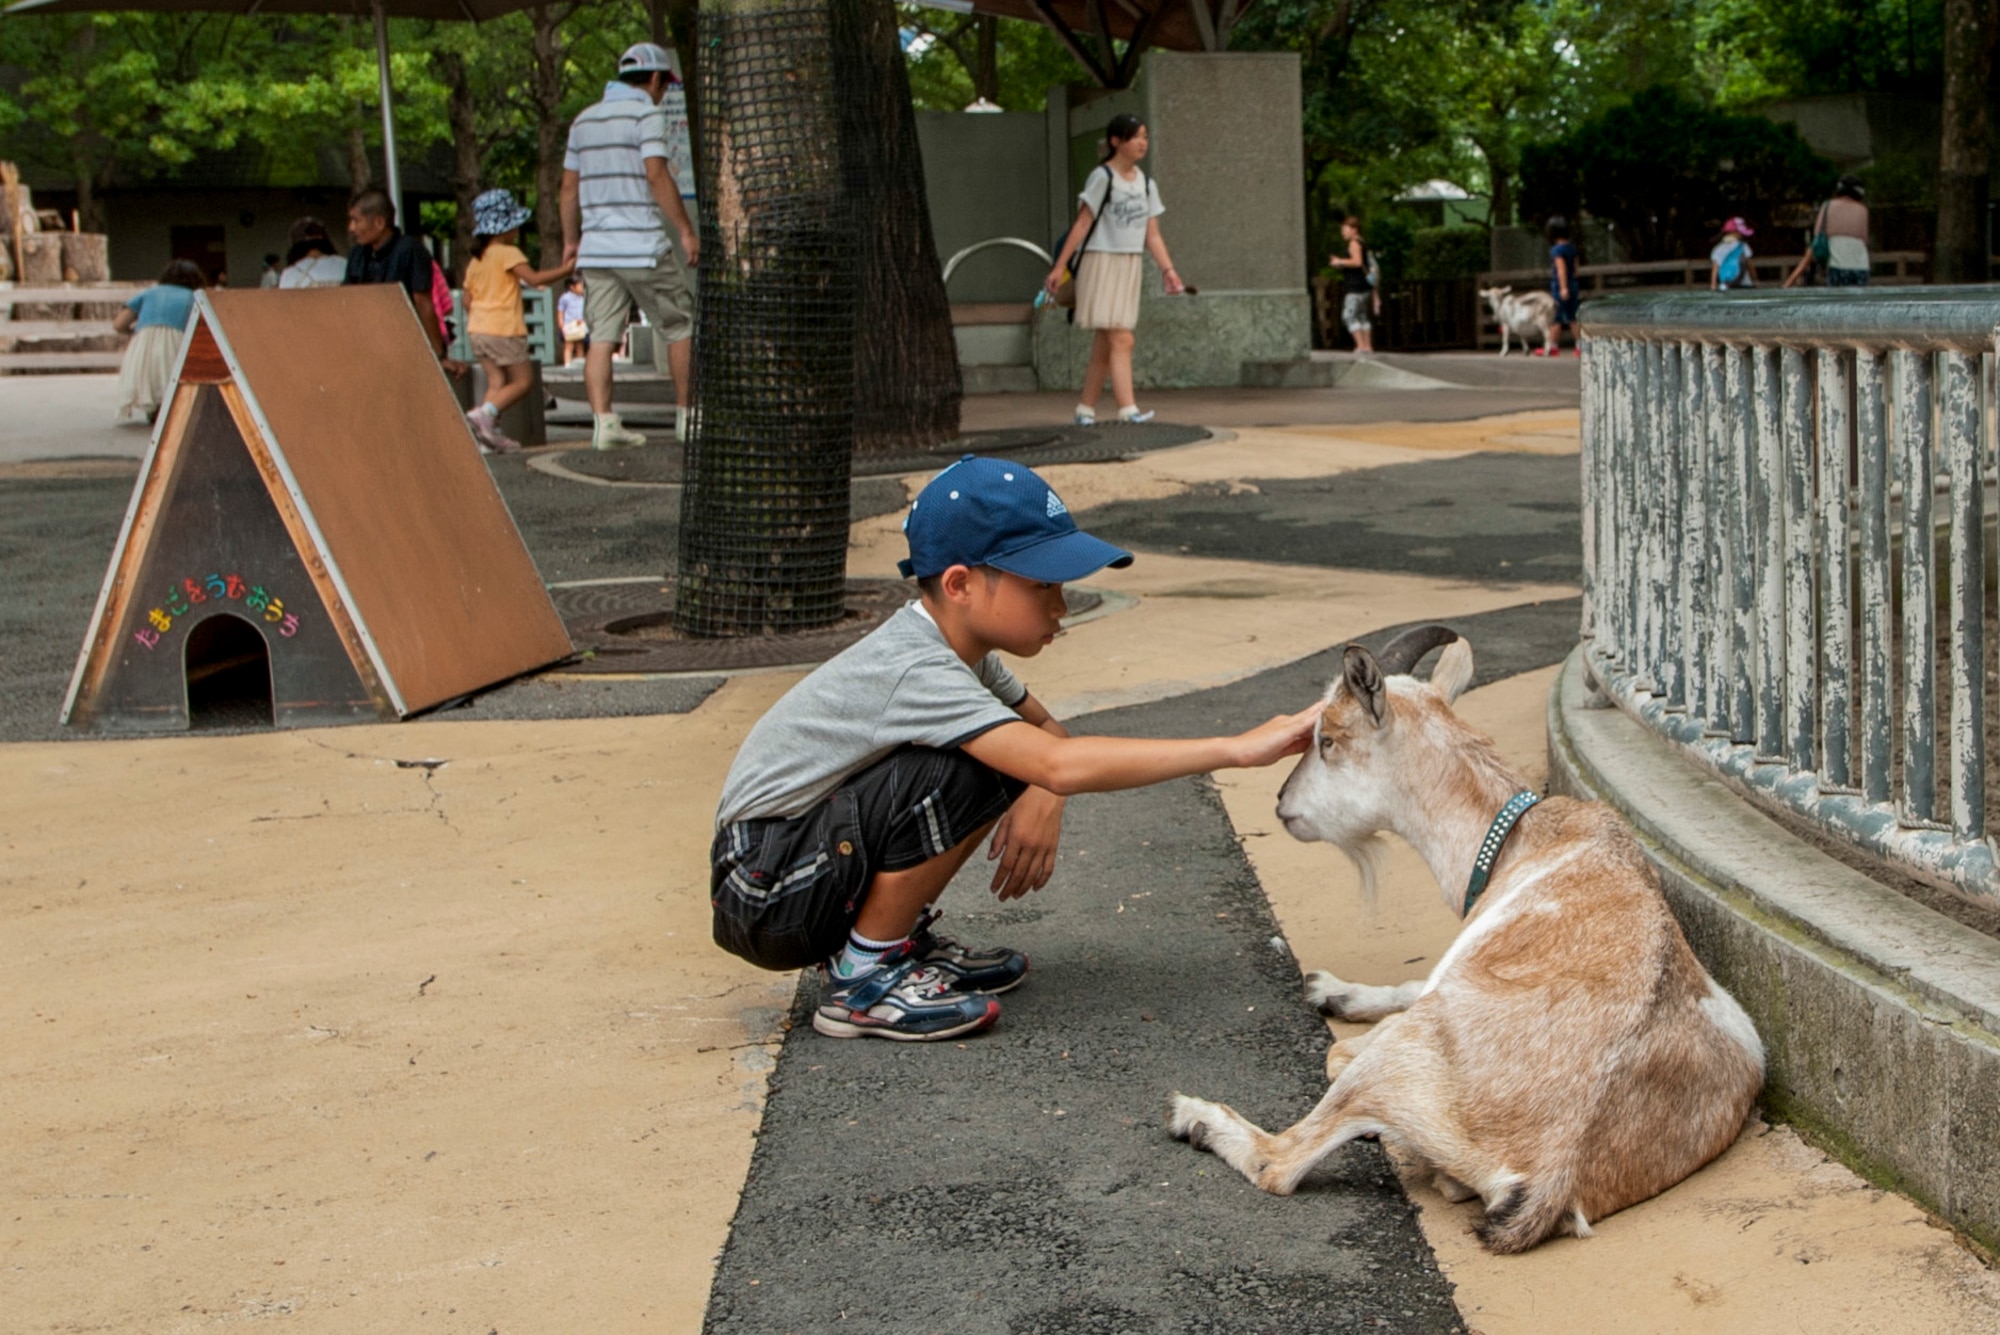 A young boy pets a goat at the children’s zoo area of Ueno Zoo Aug. 6, 2013. Along with goats, the children’s zoo also has horses, llamas, donkeys and other domestic animals. (U.S. Air Force photo by Senior Airman Michael Washburn)